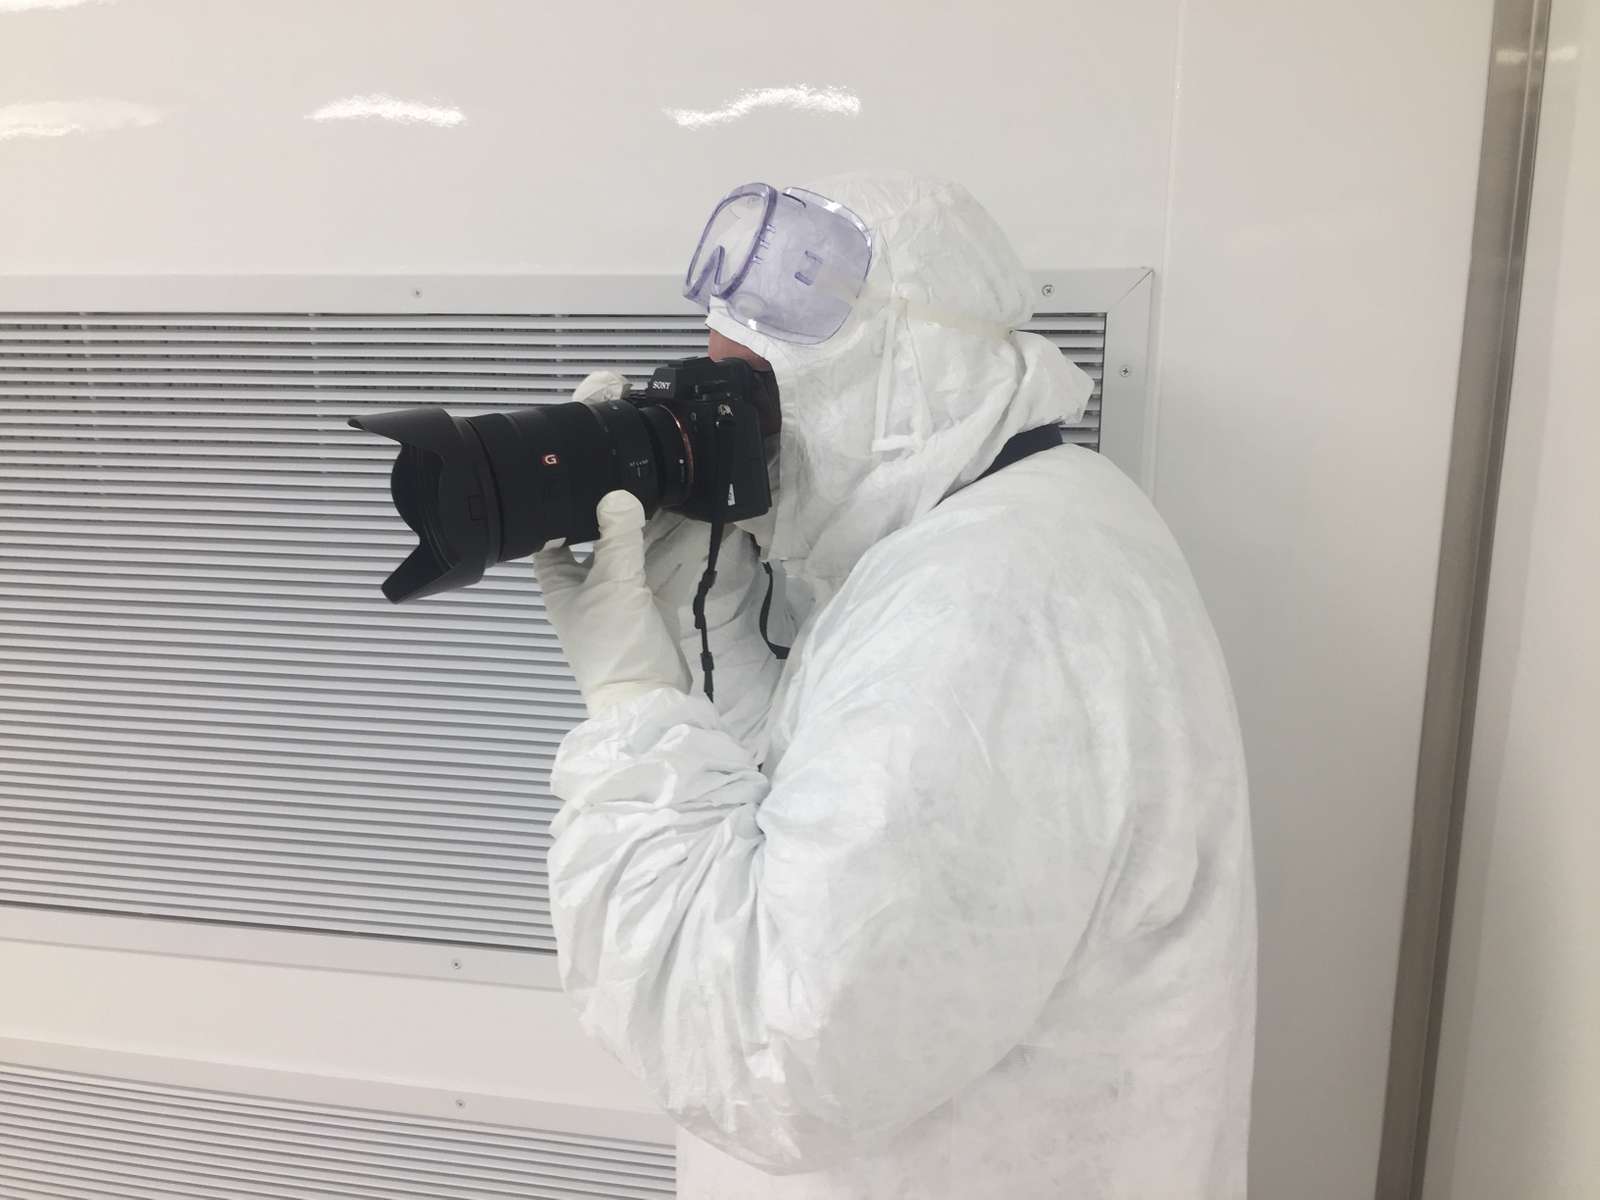 On Assignment with Digital Assistant Jason Wise in Phoenix, AZ shooting a new BBraun Saline Clean Room Facility.